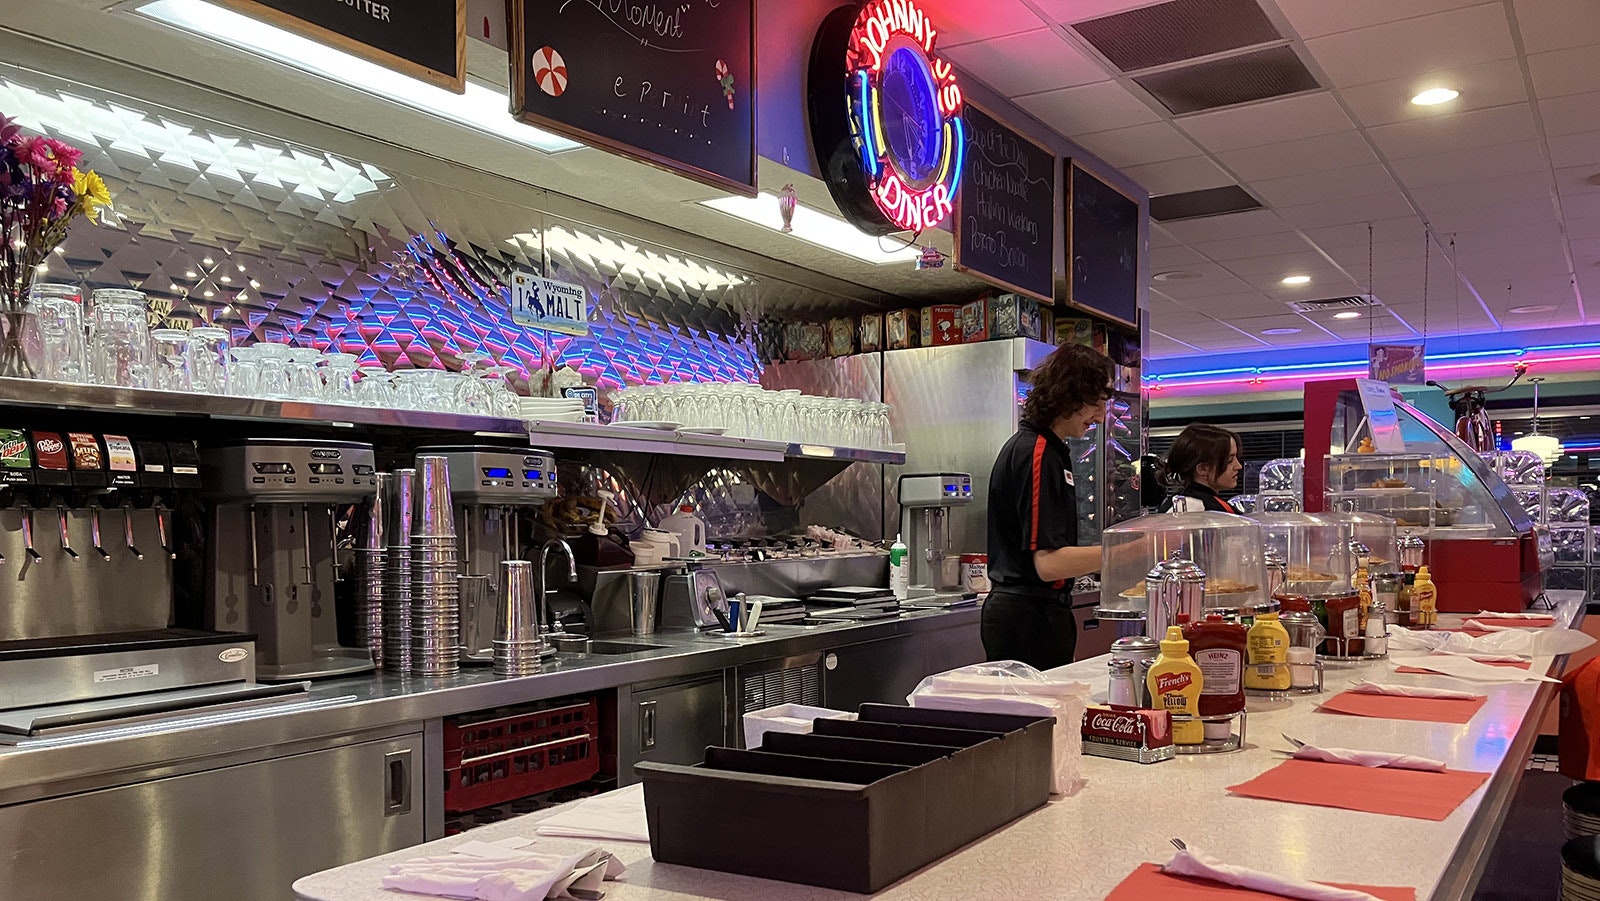 The counter area at Johnny J’s Diner features counter seating and the tools to make its popular malts and shakes.